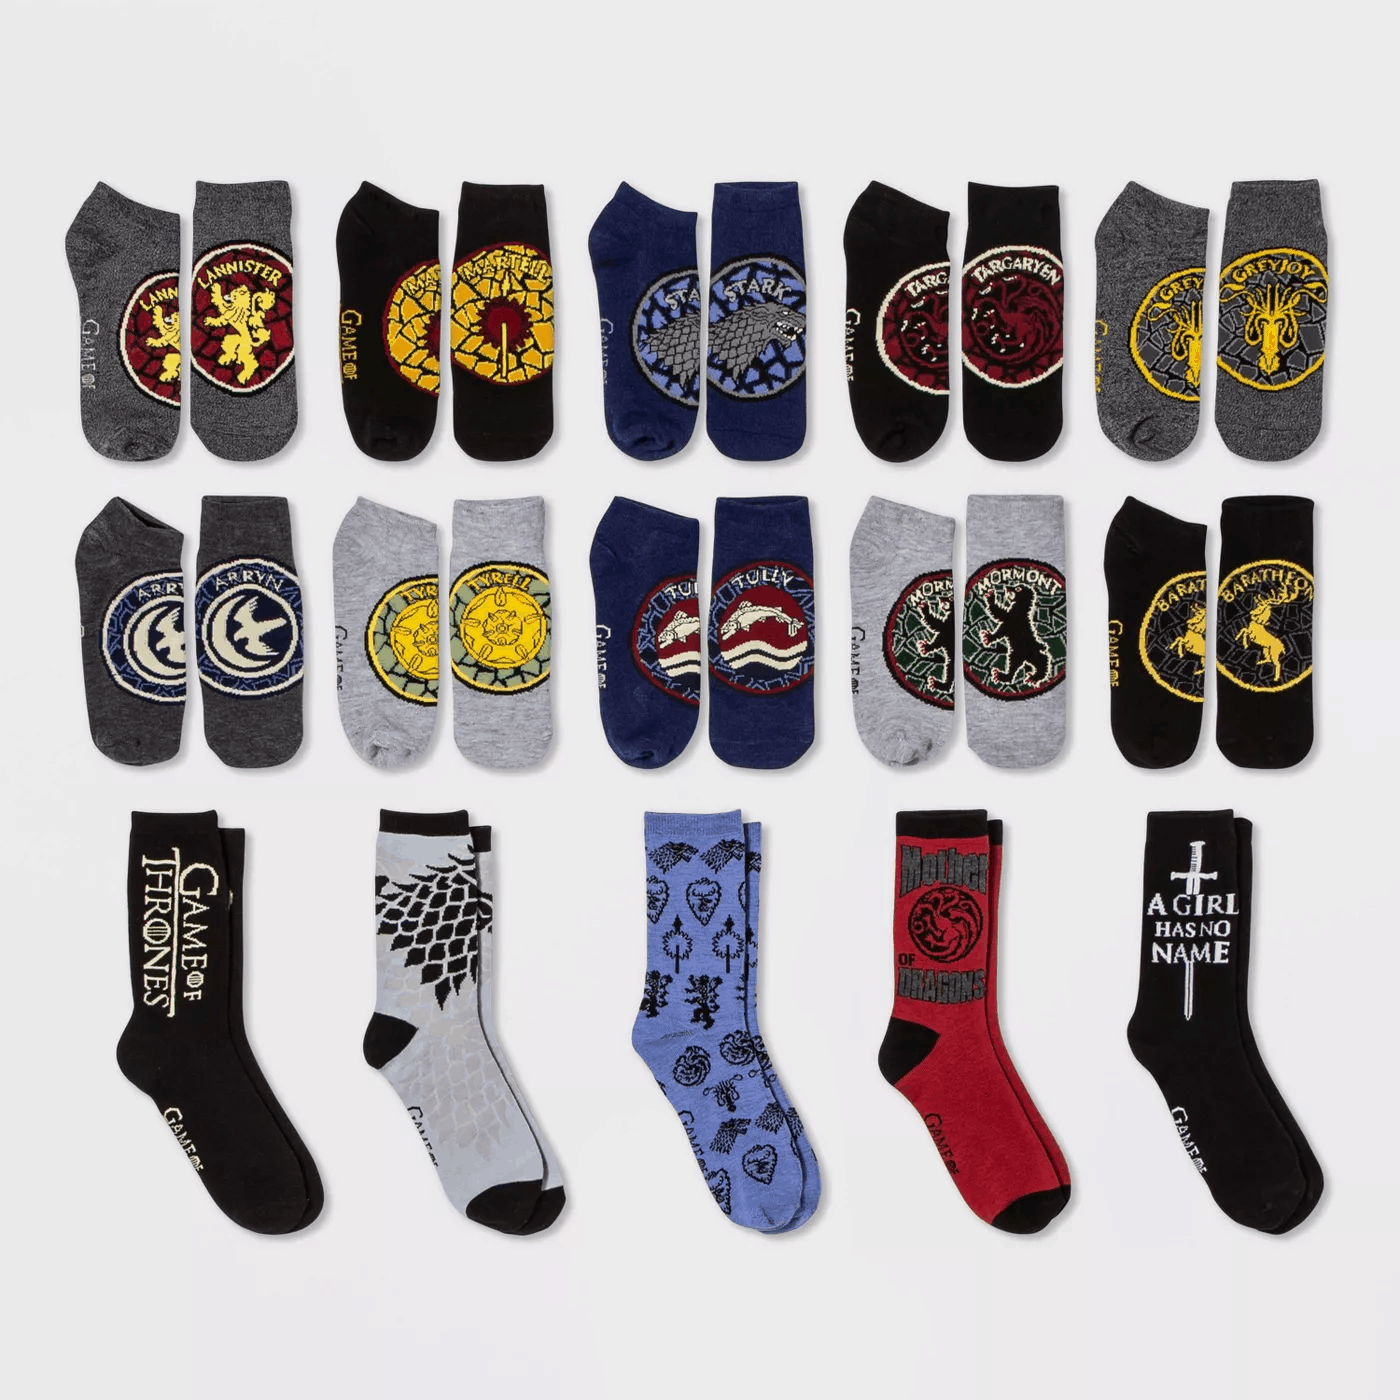 2019 Target Game of Thrones Socks Advent Calendar Available Now ...